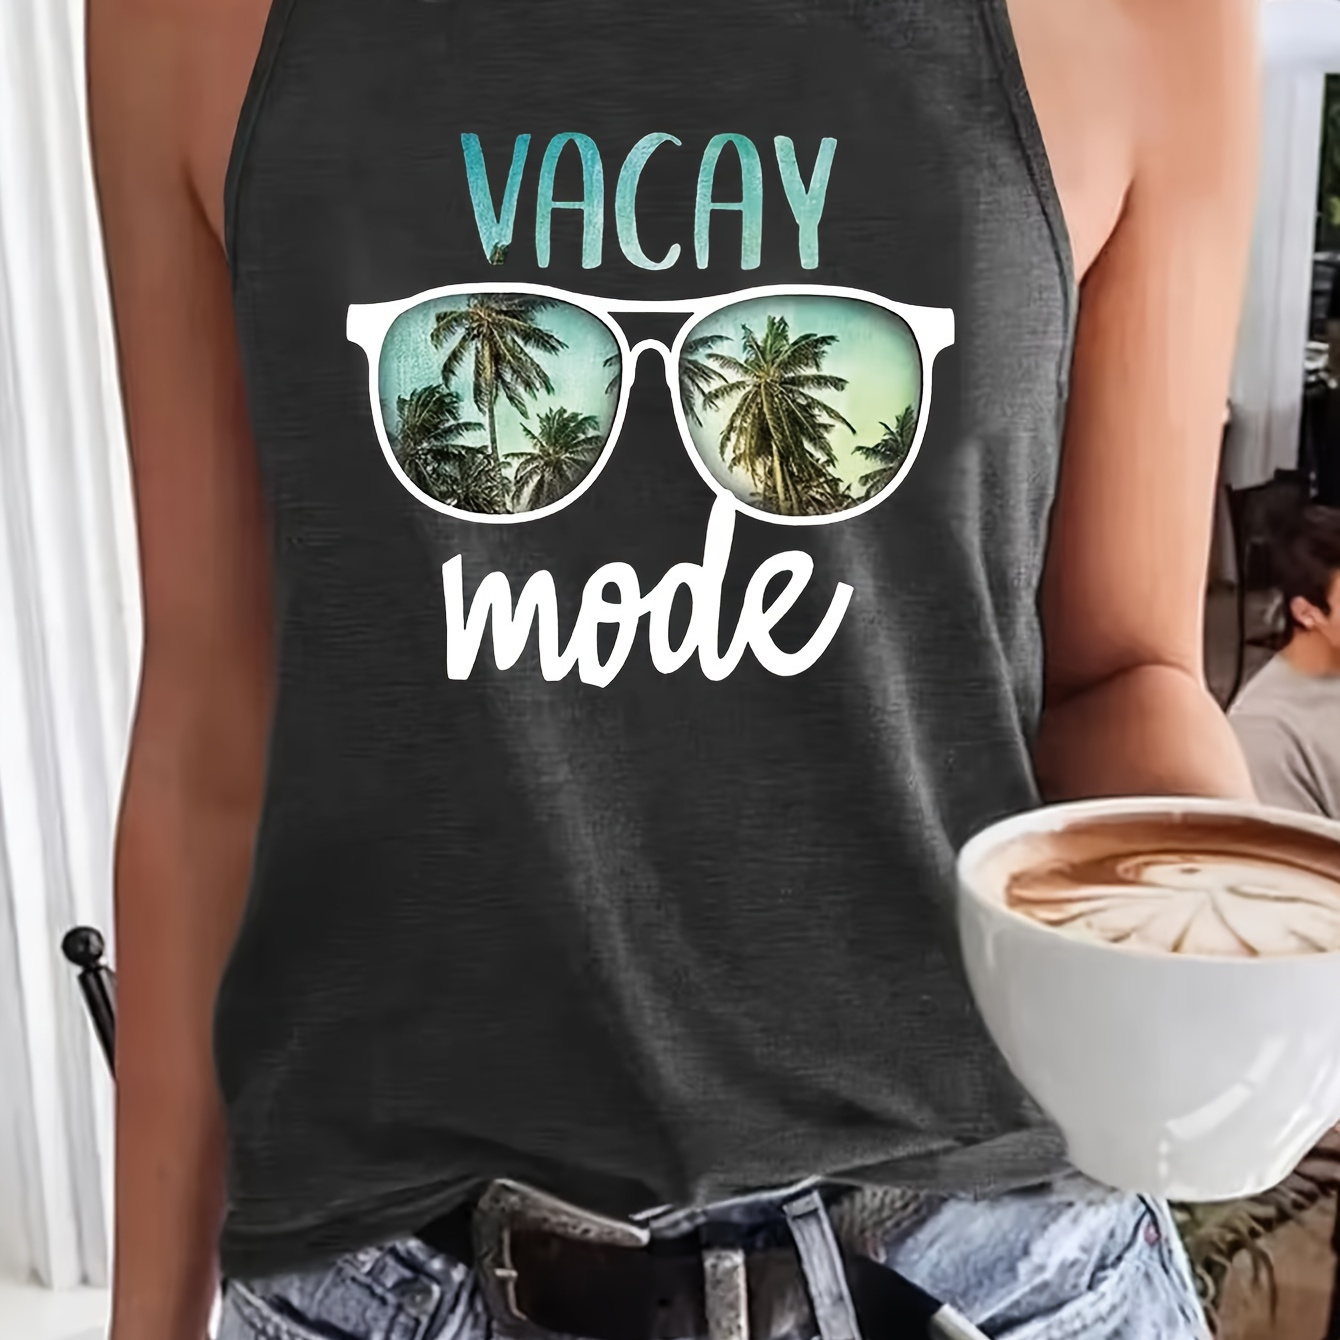 

Vacay Mode Print Crew Neck Tank Top, Casual Sleeveless Top For Summer & Spring, Women's Clothing